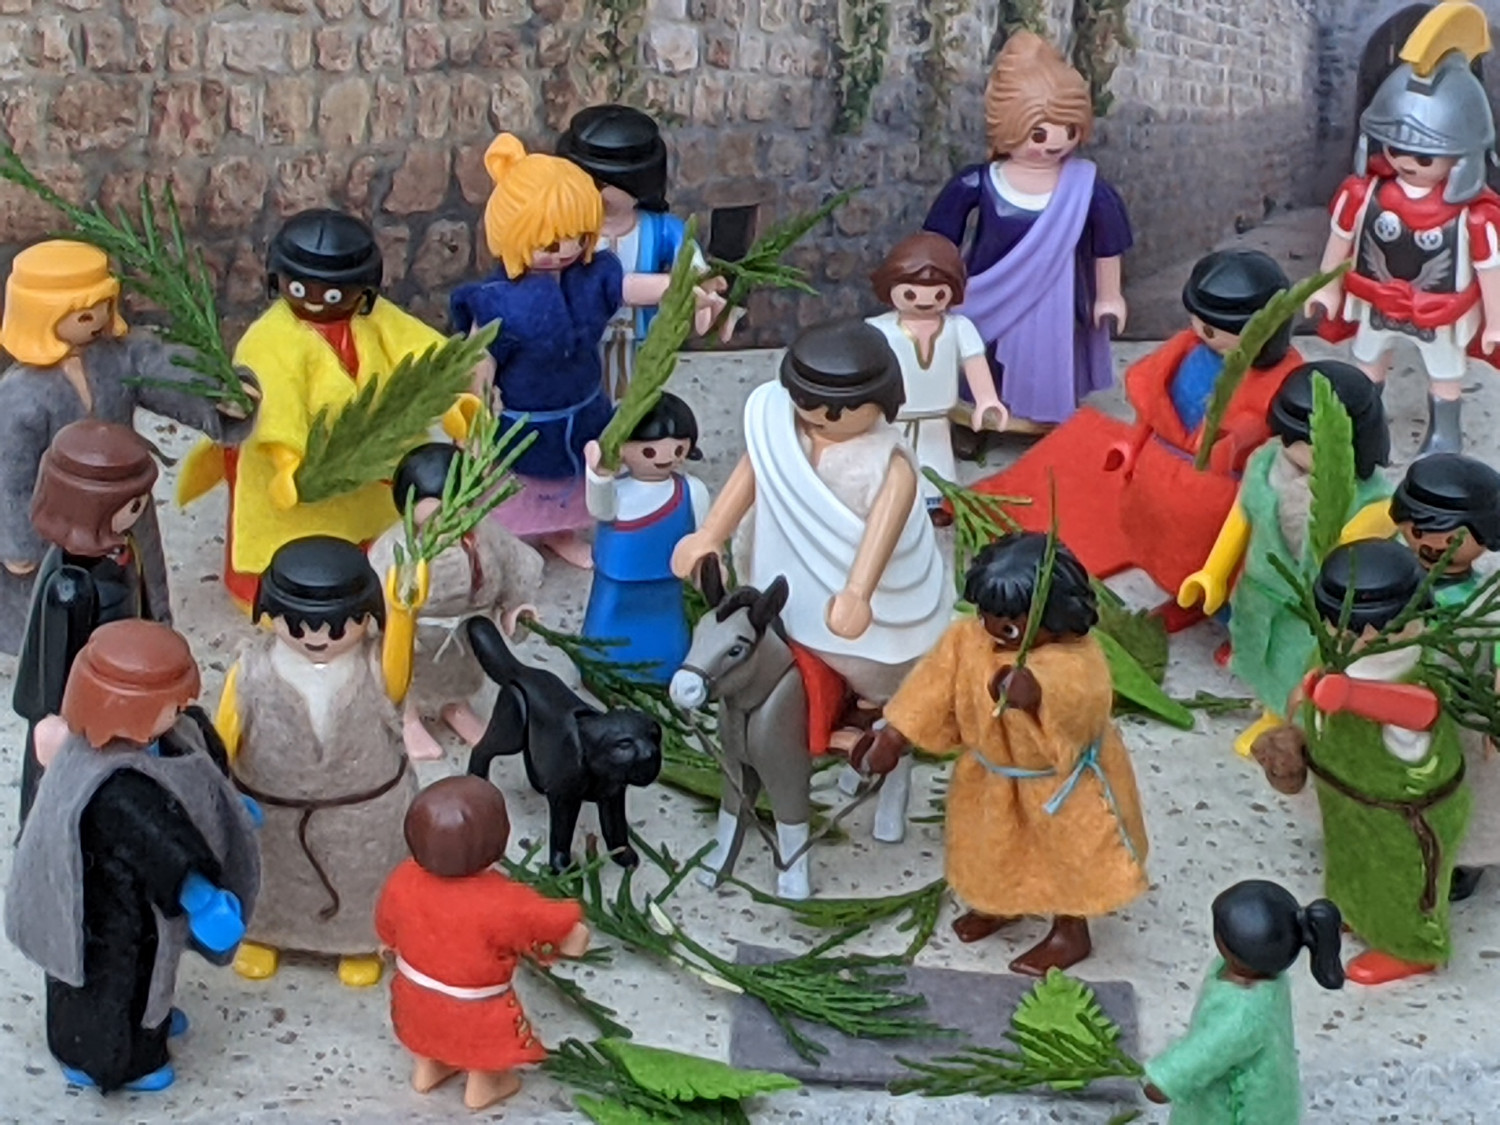 Palm sunday with Playmobil characters